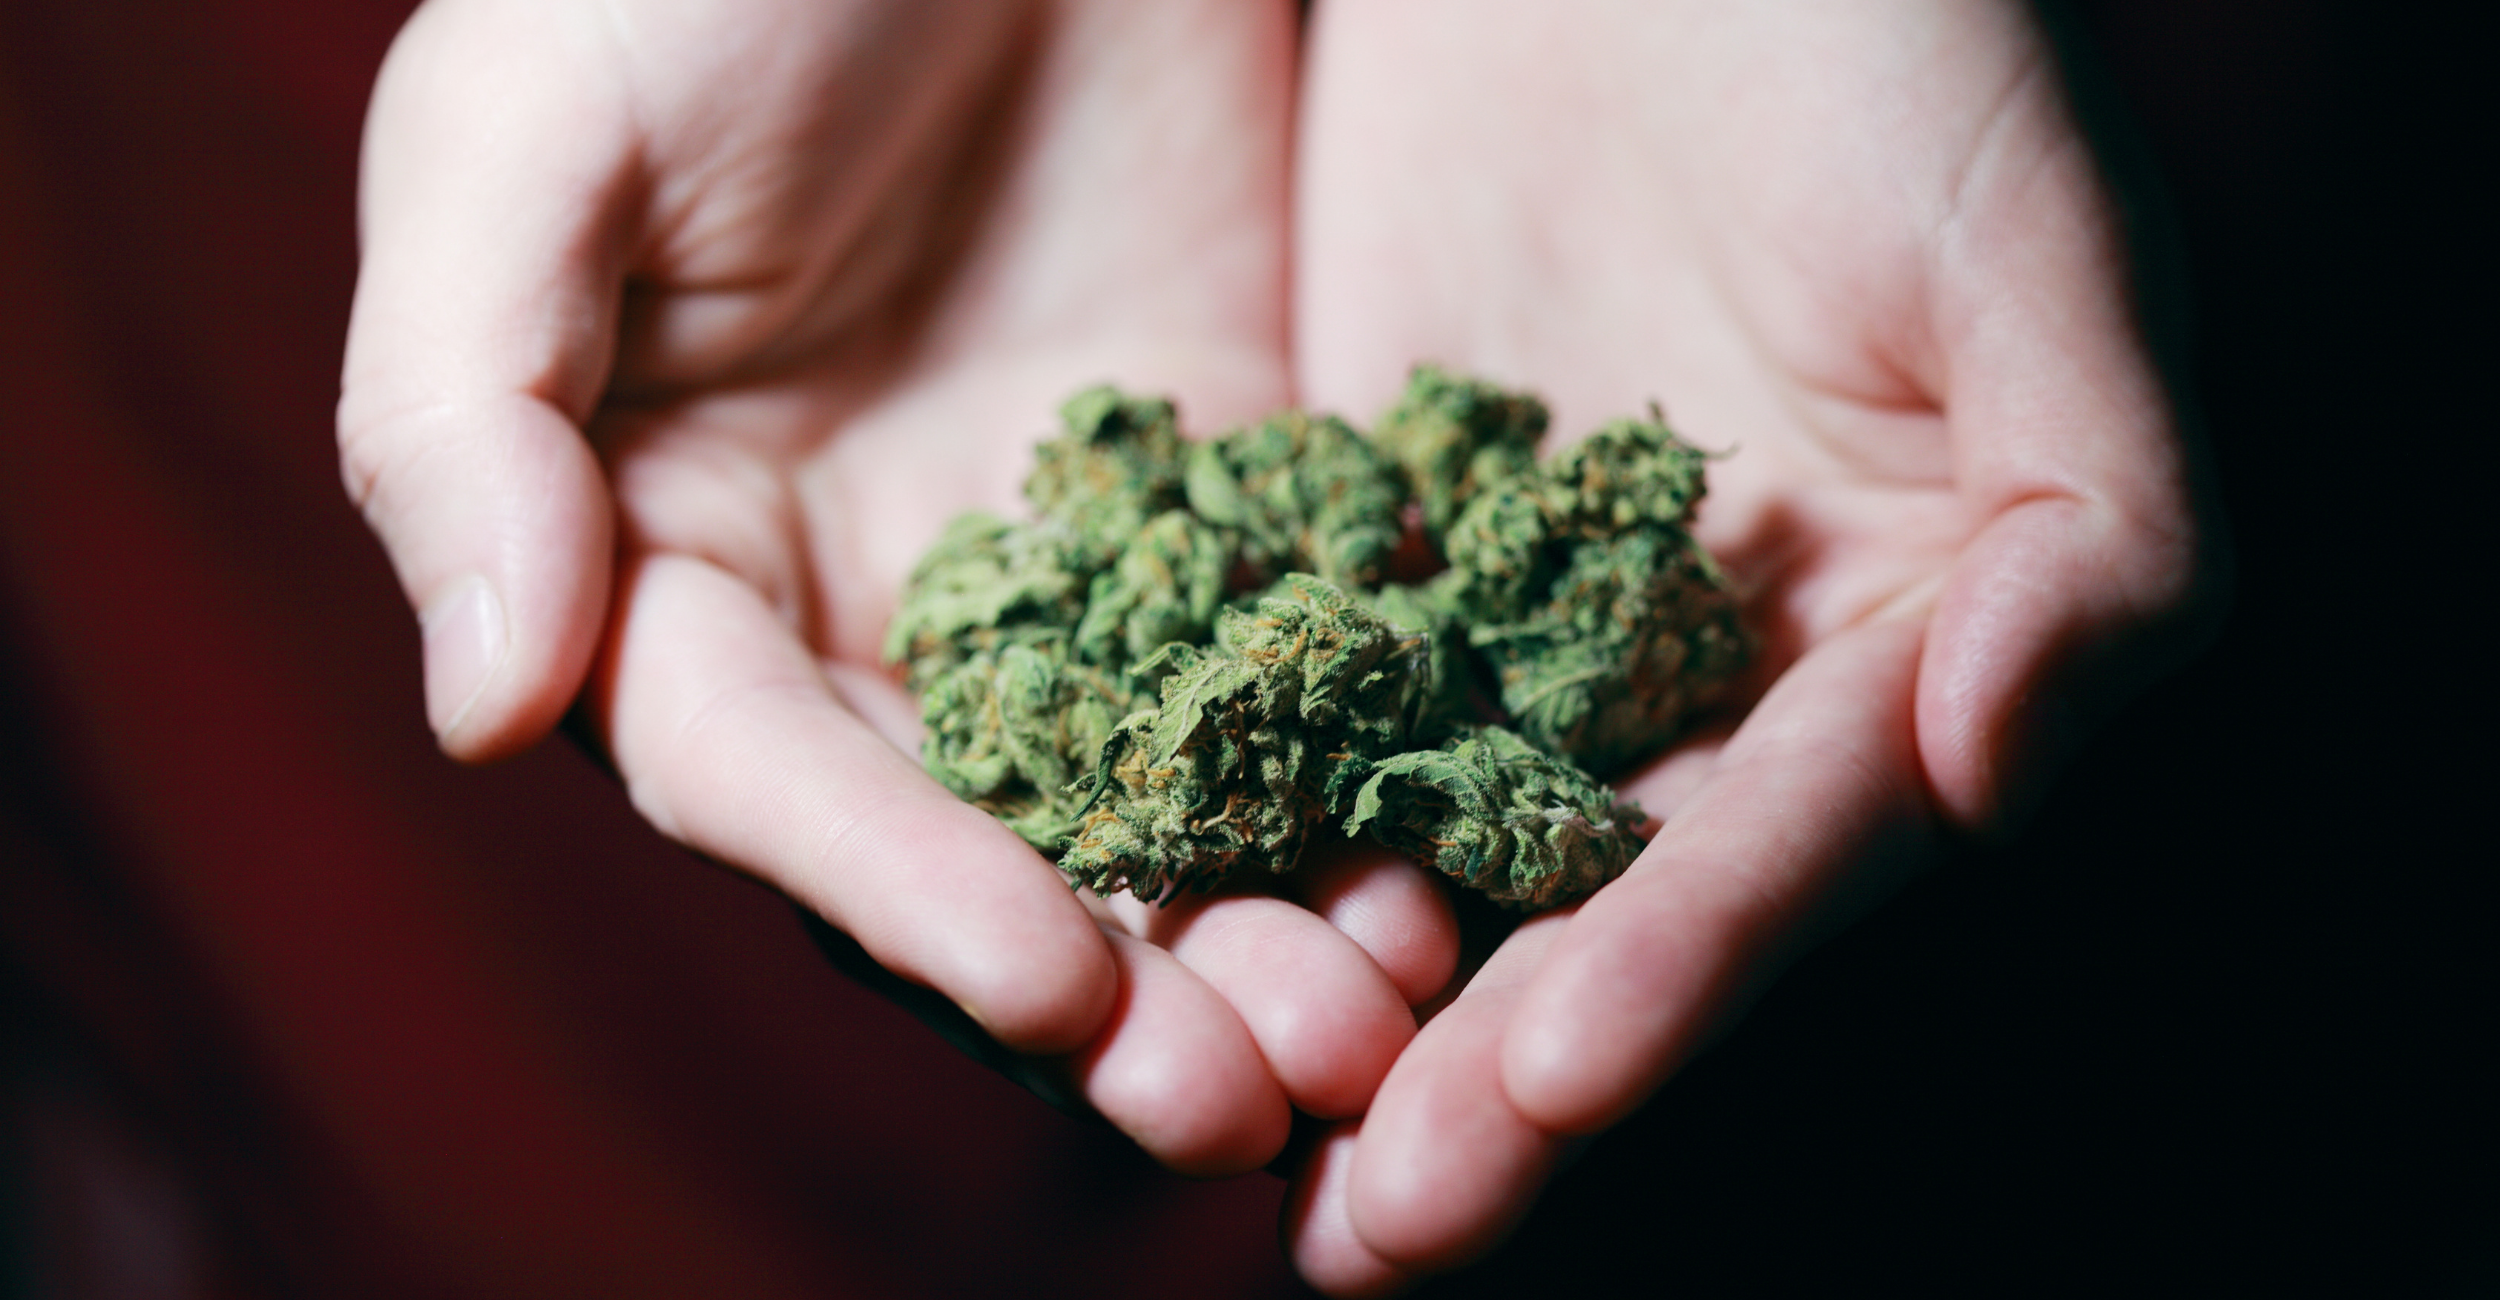 Wisconsin Marijuana Legalization - The Potential Impacts on Criminal Laws